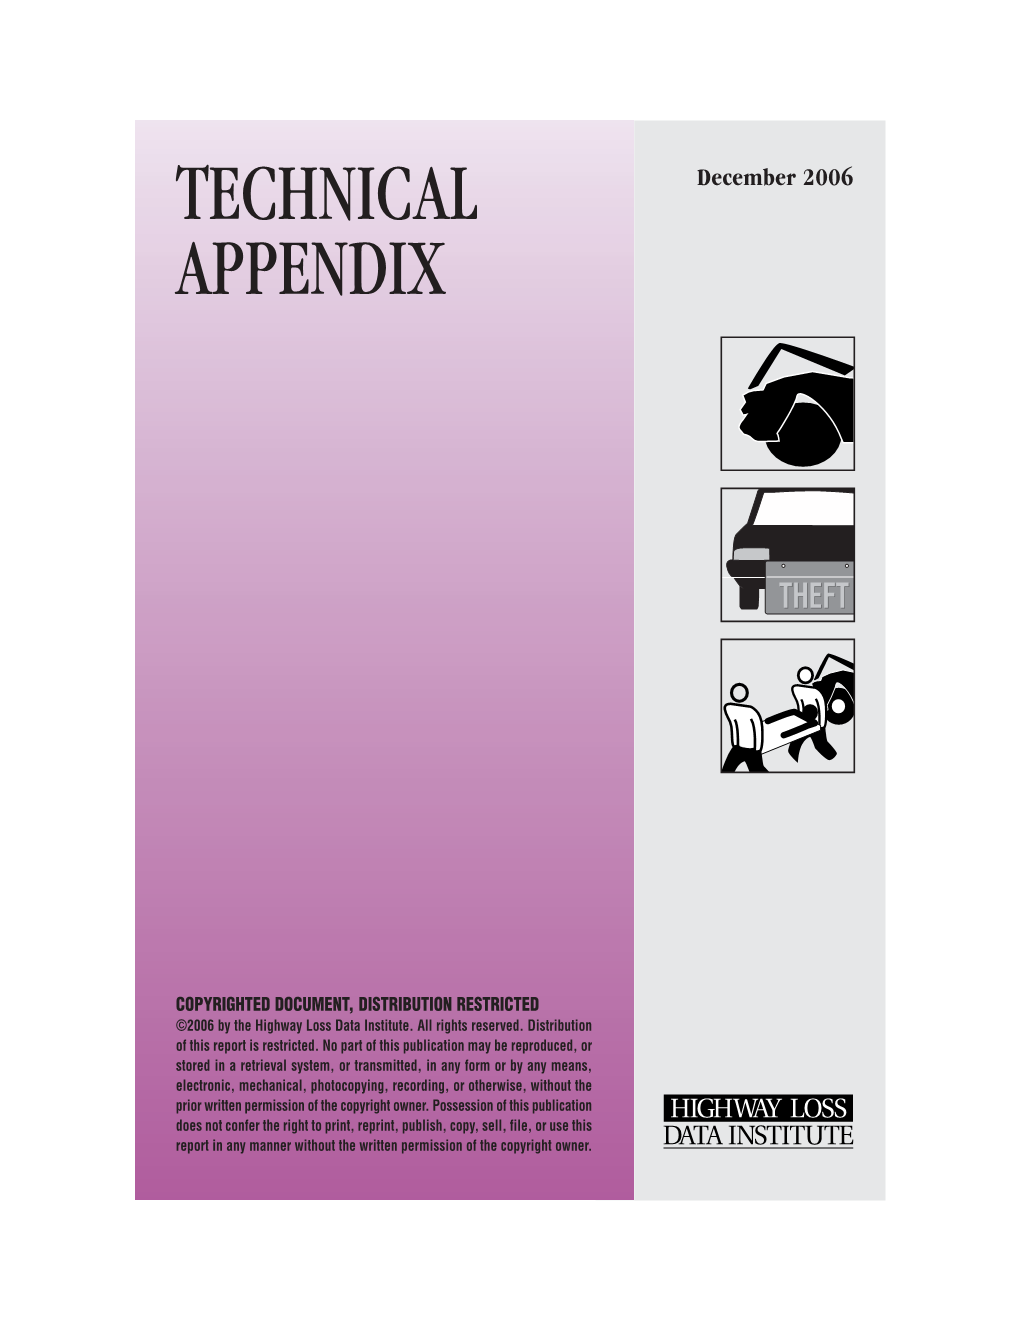 Technical Appendix Defines Terms and Classifications Used in HLDI Reports